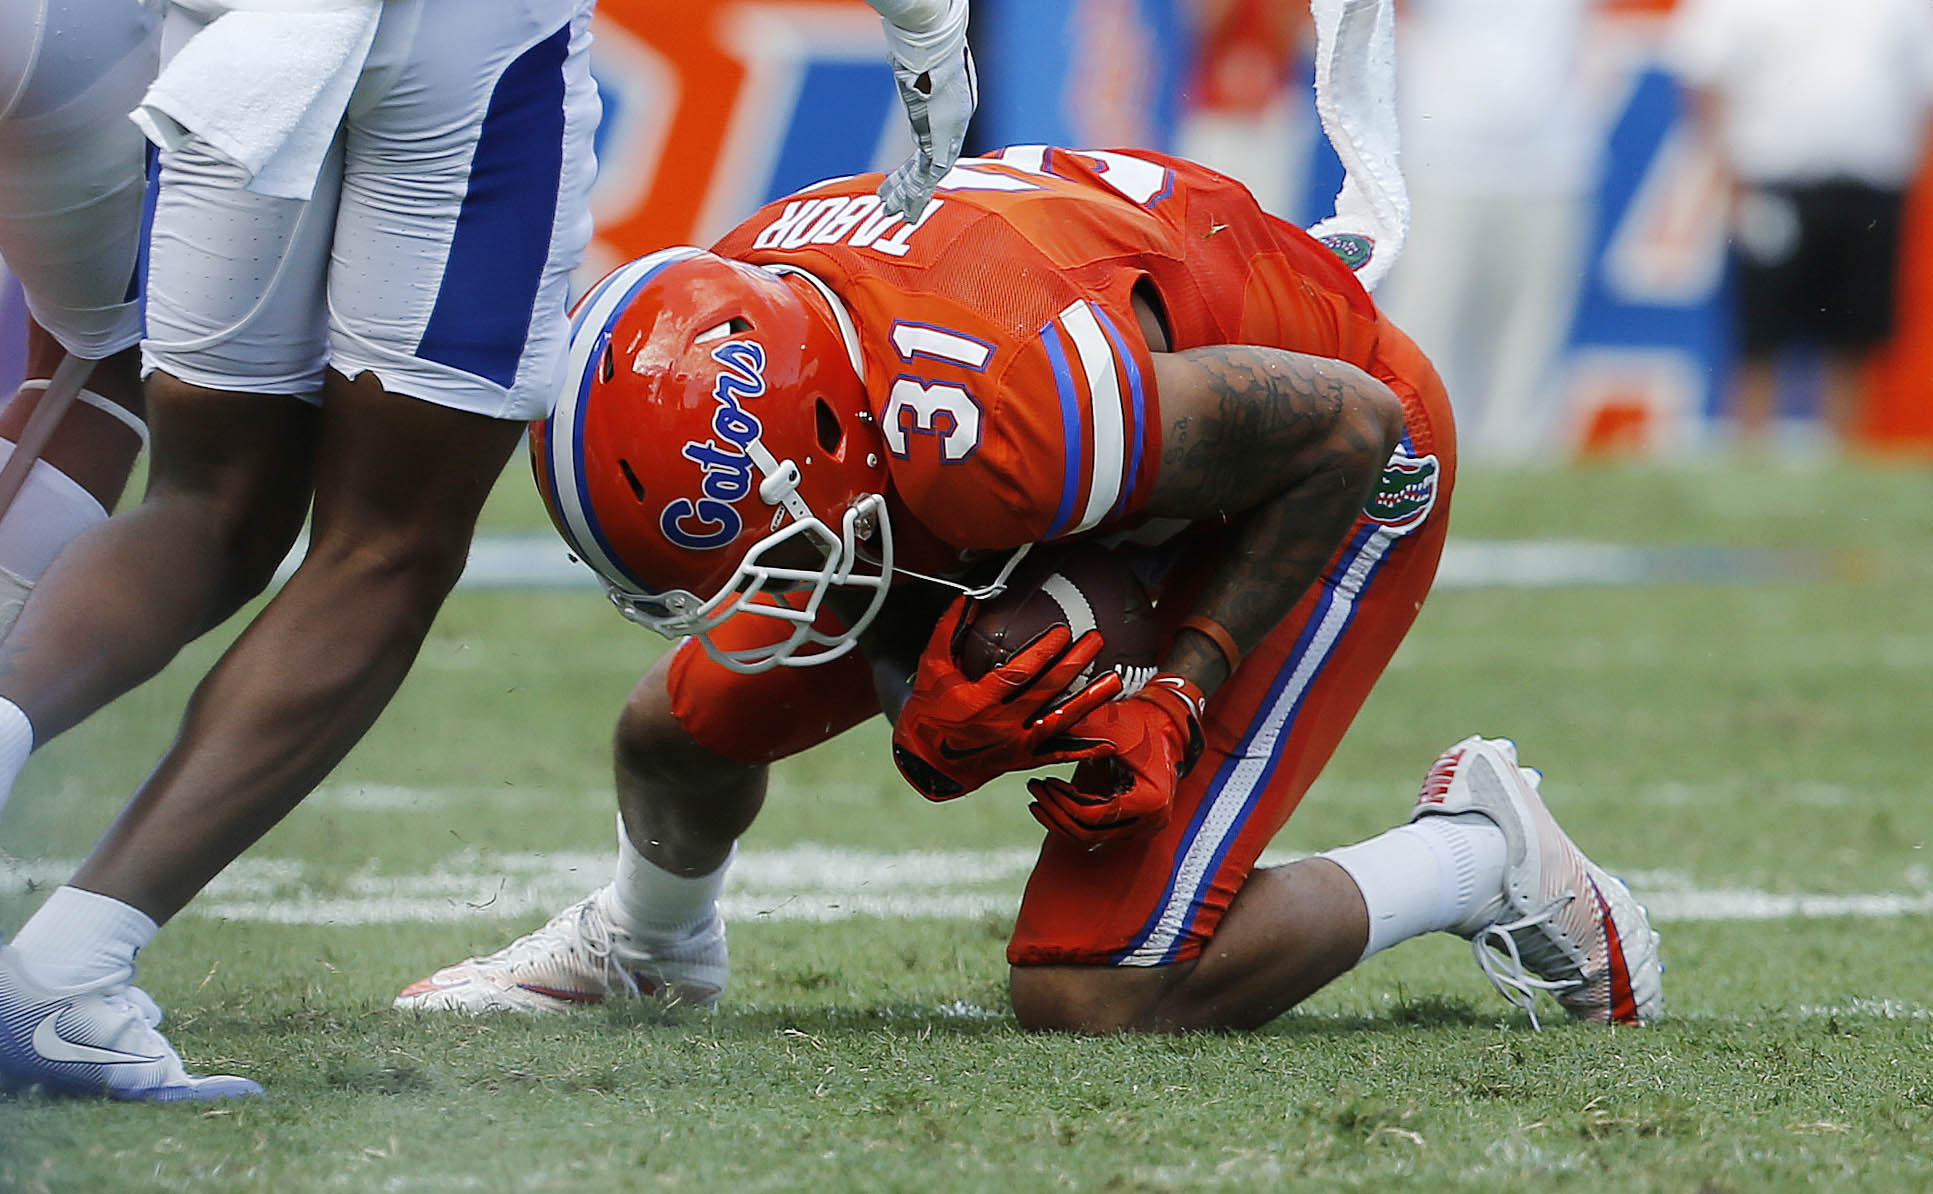 Sep 10, 2016; Gainesville, FL, USA; Florida Gators defensive back Teez Tabor (31) intecepts the ball against the Kentucky Wildcats during the first half at Ben Hill Griffin Stadium. Mandatory Credit: Kim Klement-USA TODAY Sports